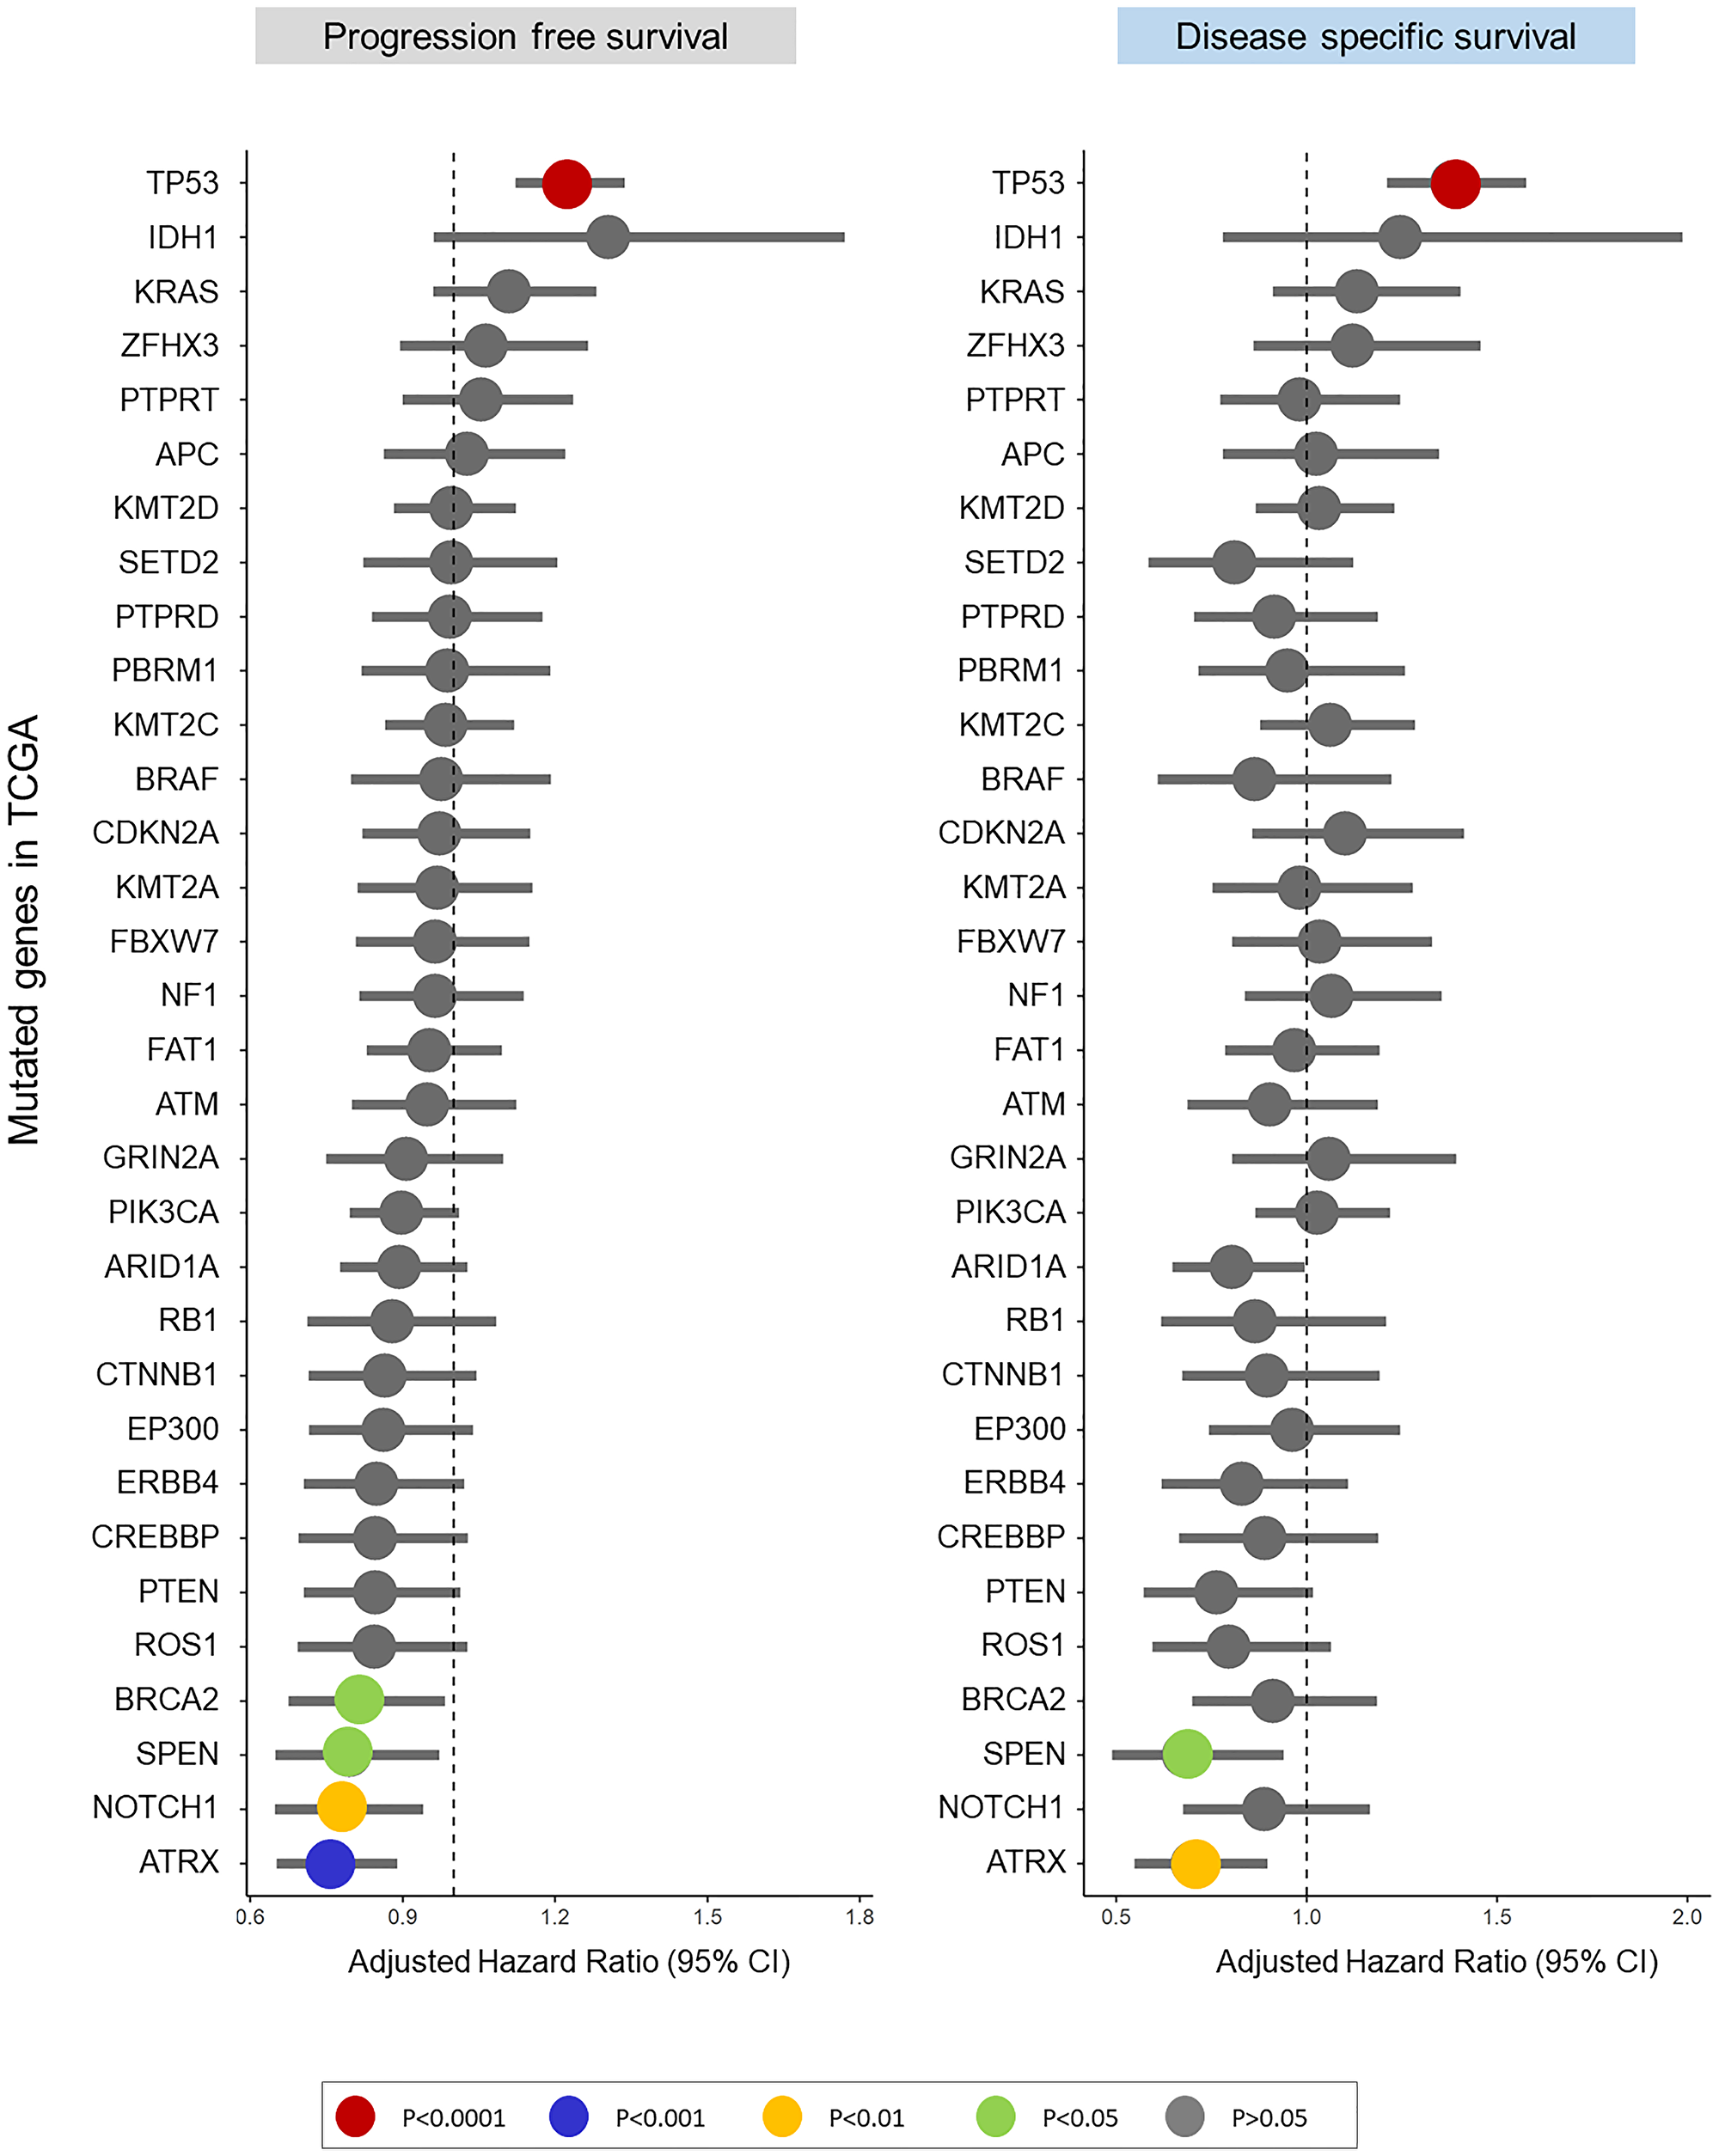 Adjusted hazard ratios from stratified Cox regression model predict PFS and DSS in the Pan-Cancer TCGA cohort for the 32 most common mutations.